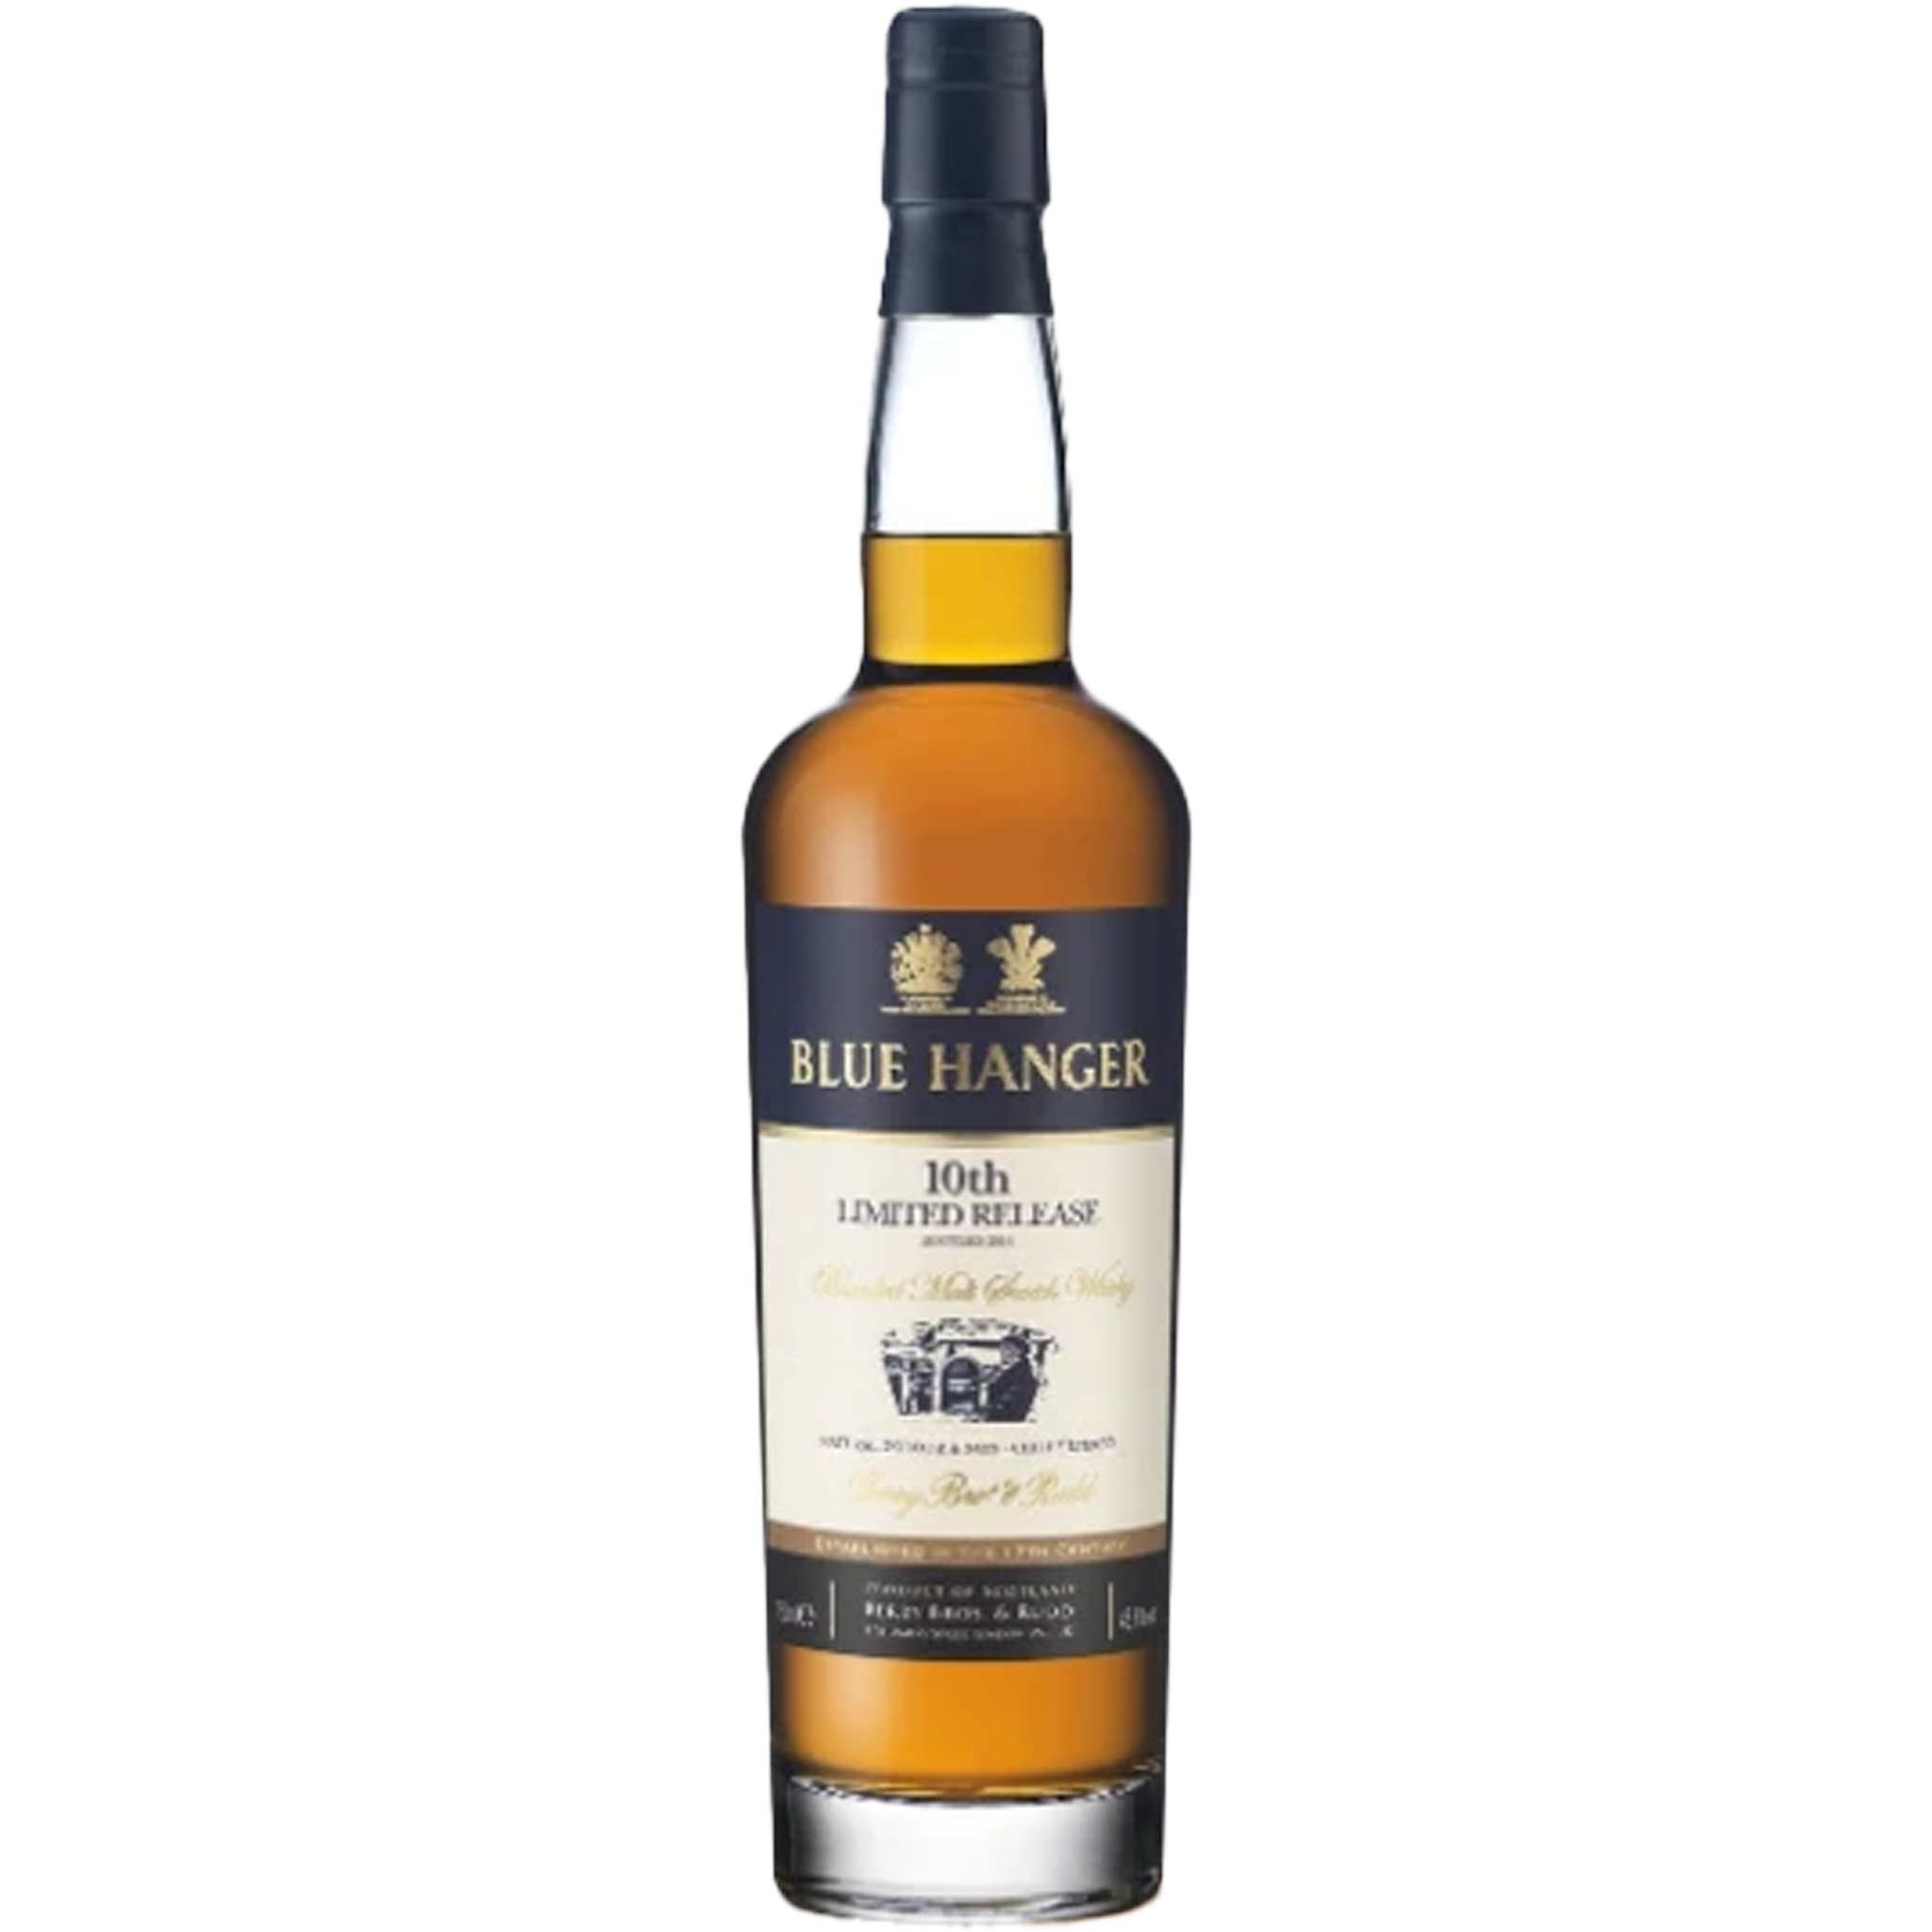 Blue Hanger Scotch Whiskey 10th Limited Release